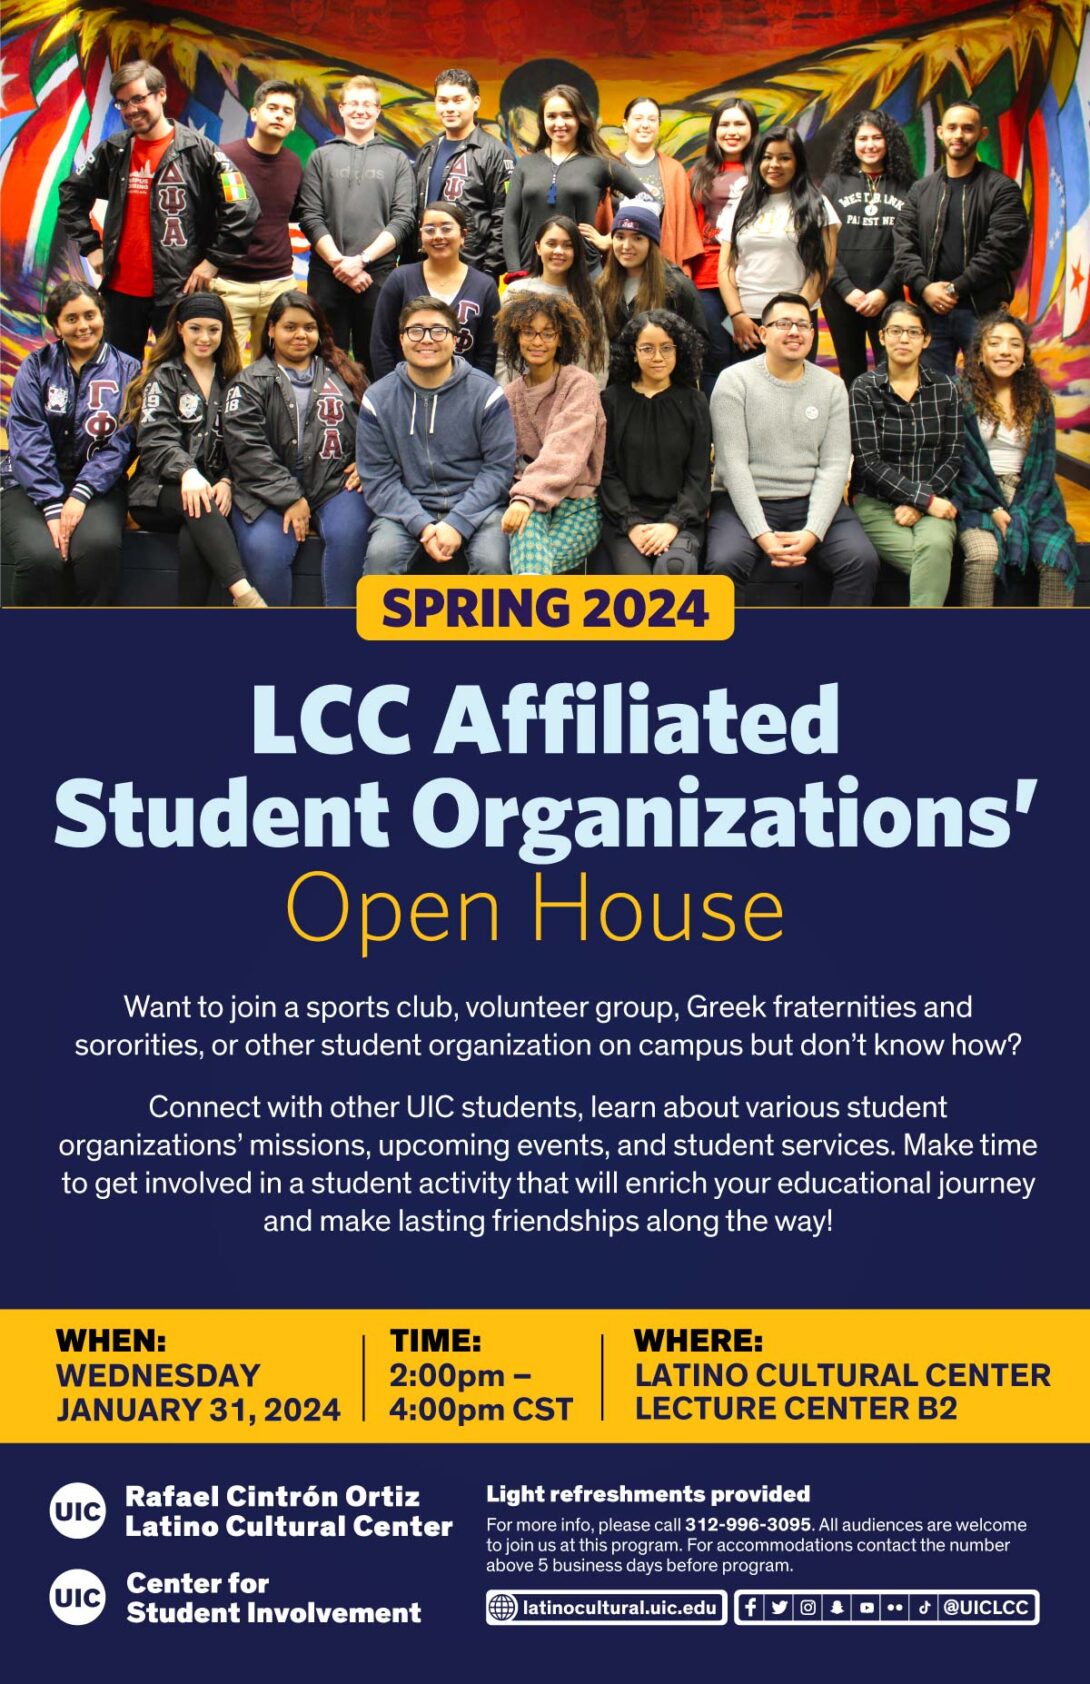 Header image of the poster includes a group of students from a wide variety of organizations